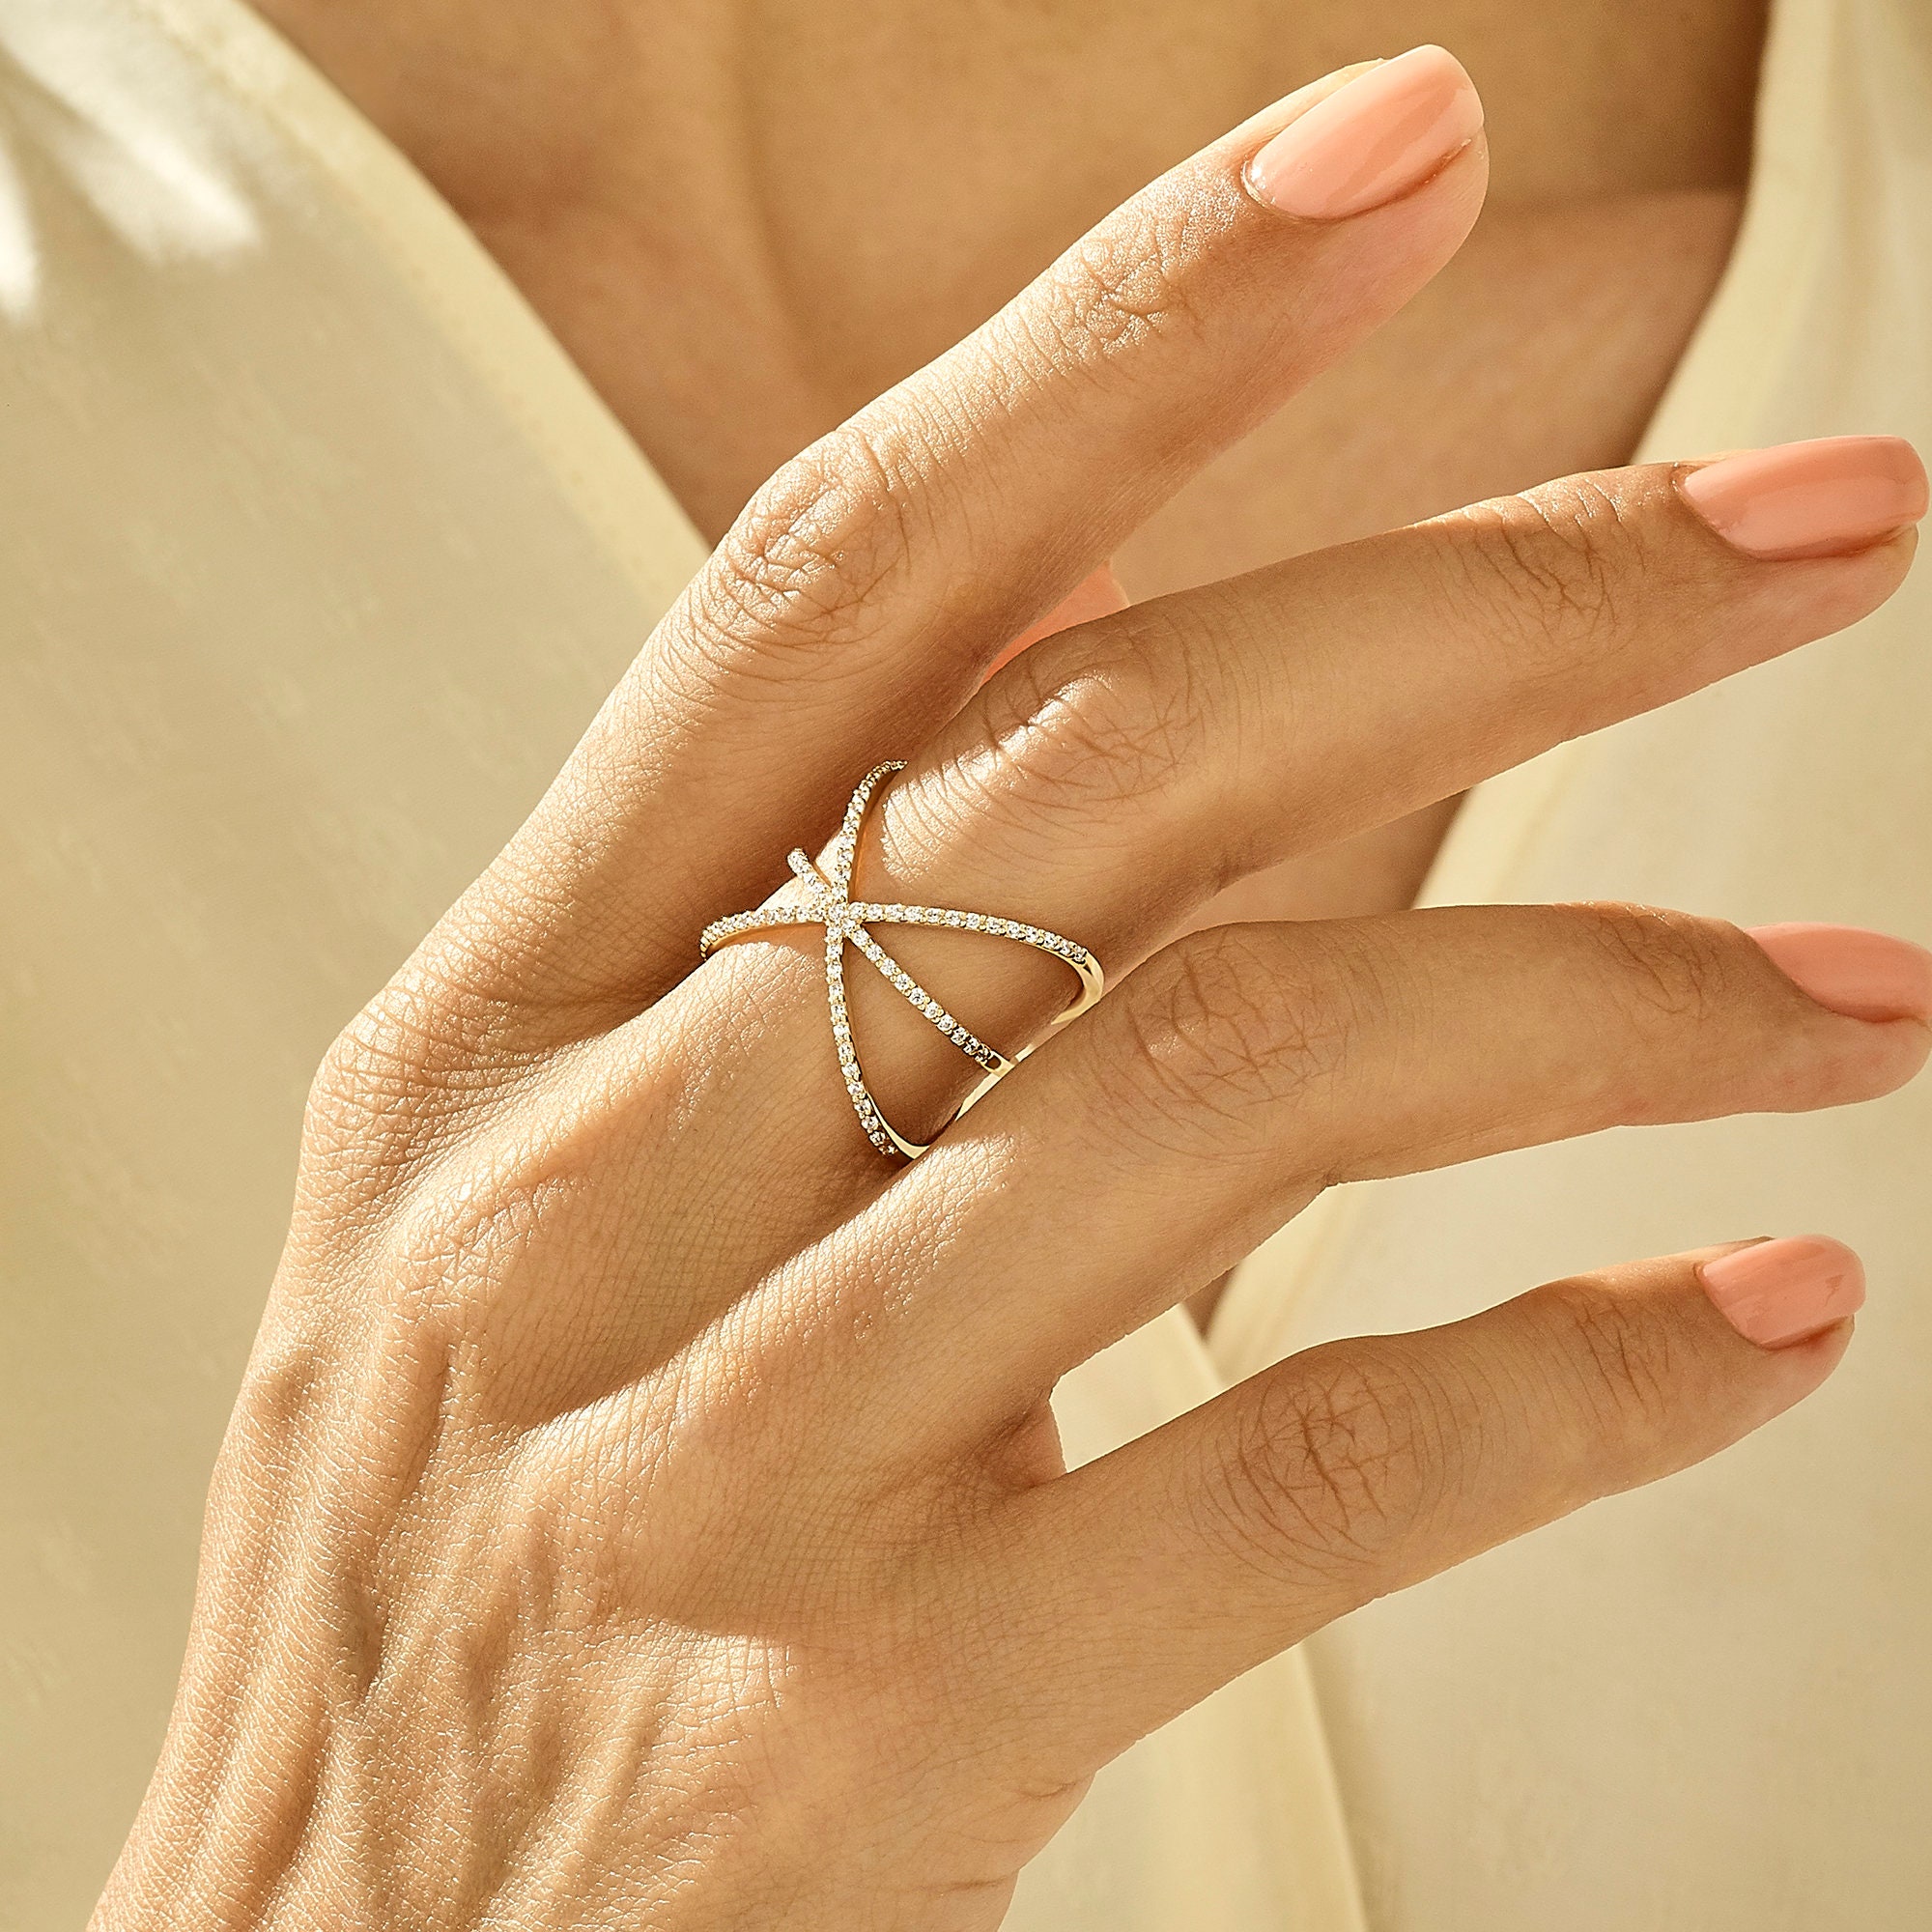 Criss Cross Ring in 18K Gold with Diamonds • Forever Jewels